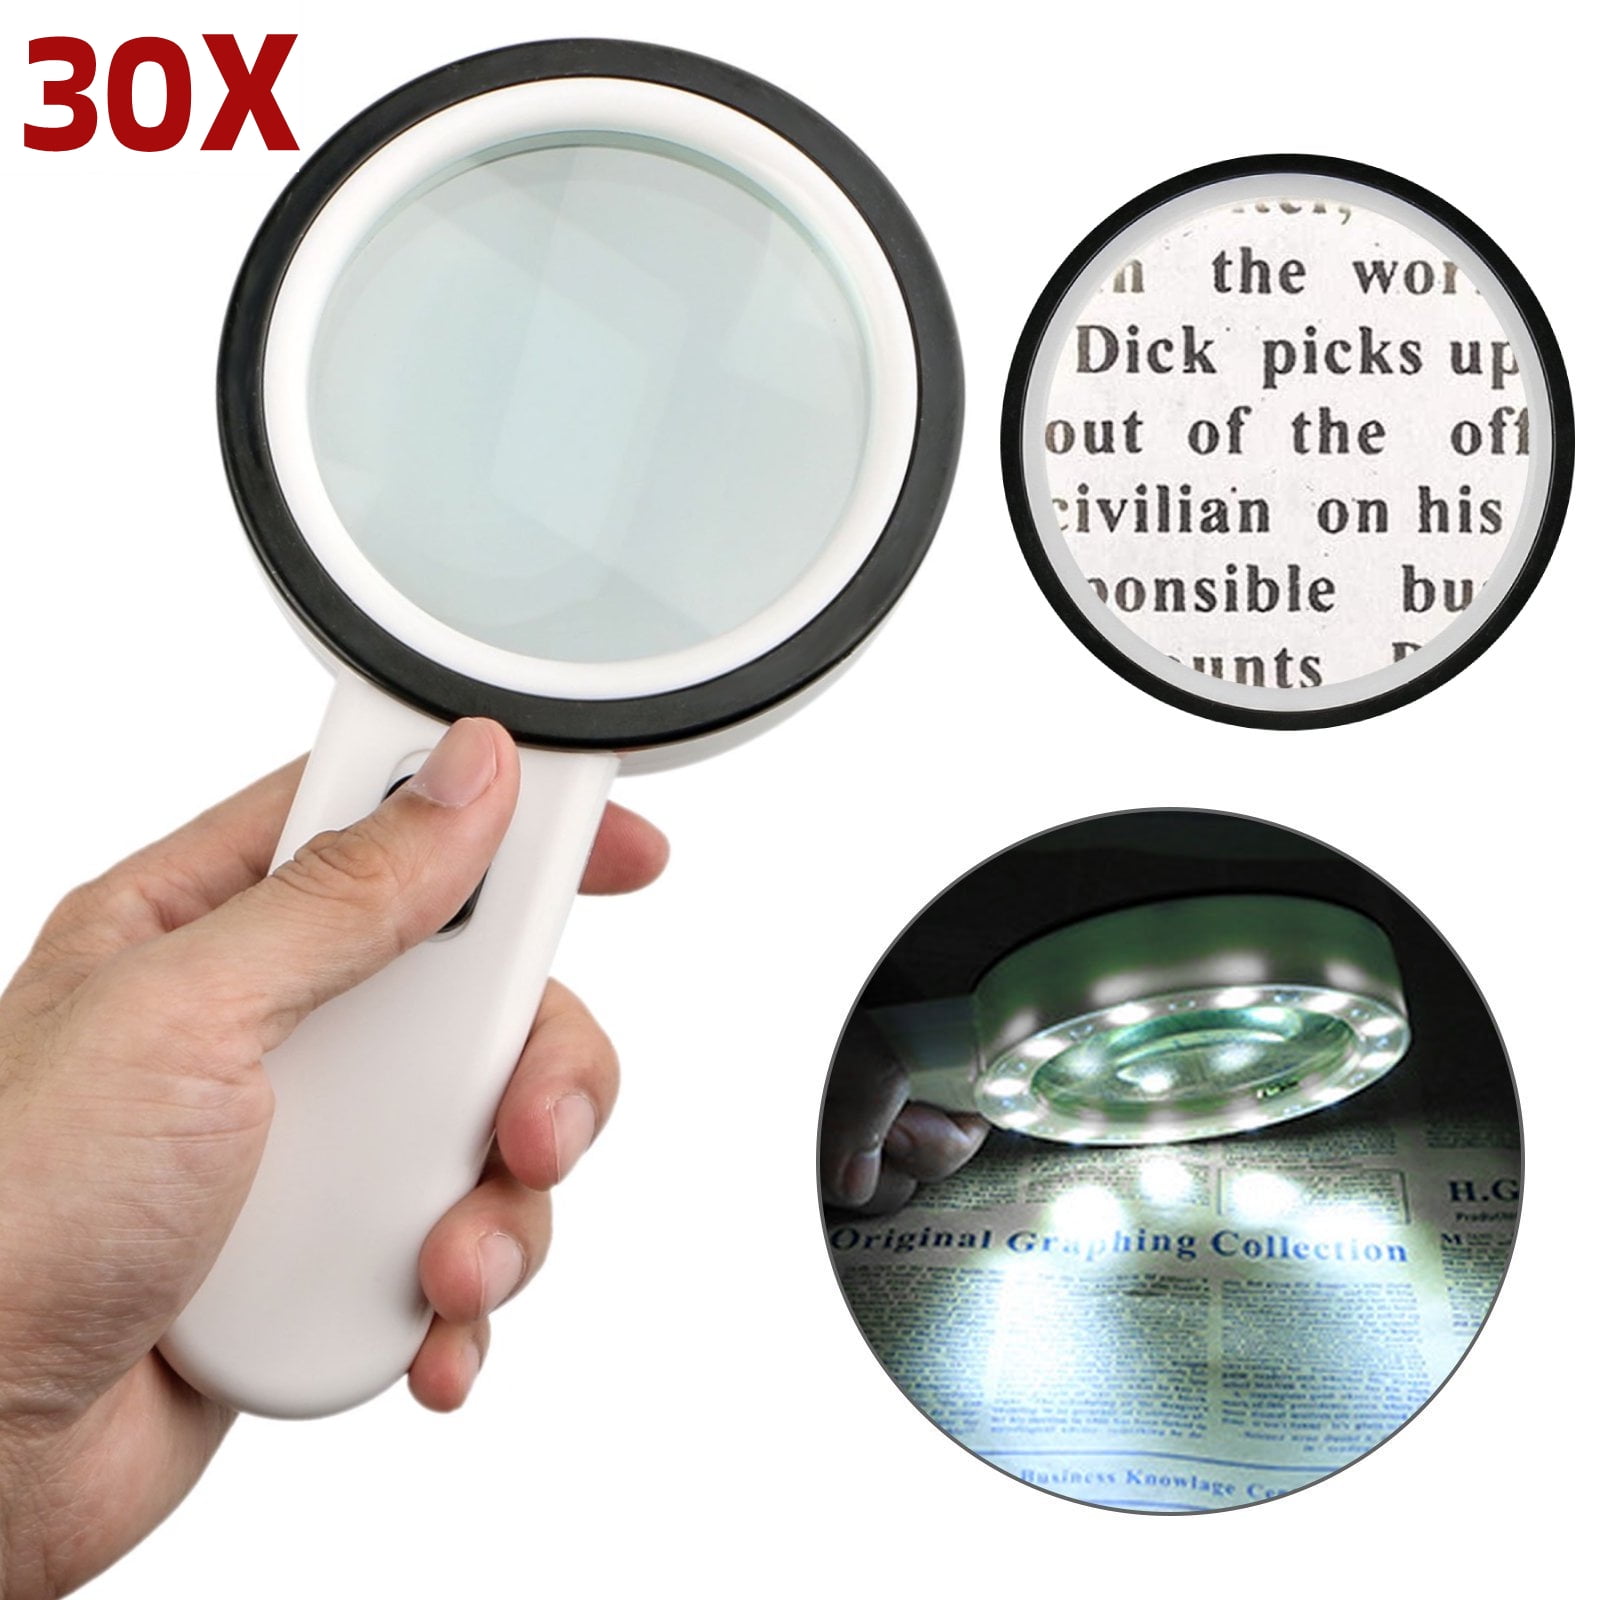 Hand-held magnifier Folding Magnifier LED Magnifier 3X Magnifier Diameter 15X-60mm Small Portable Magnifier Lightweight and Portable Suitable for Jewelry Reading Antique Children and Old People Readi